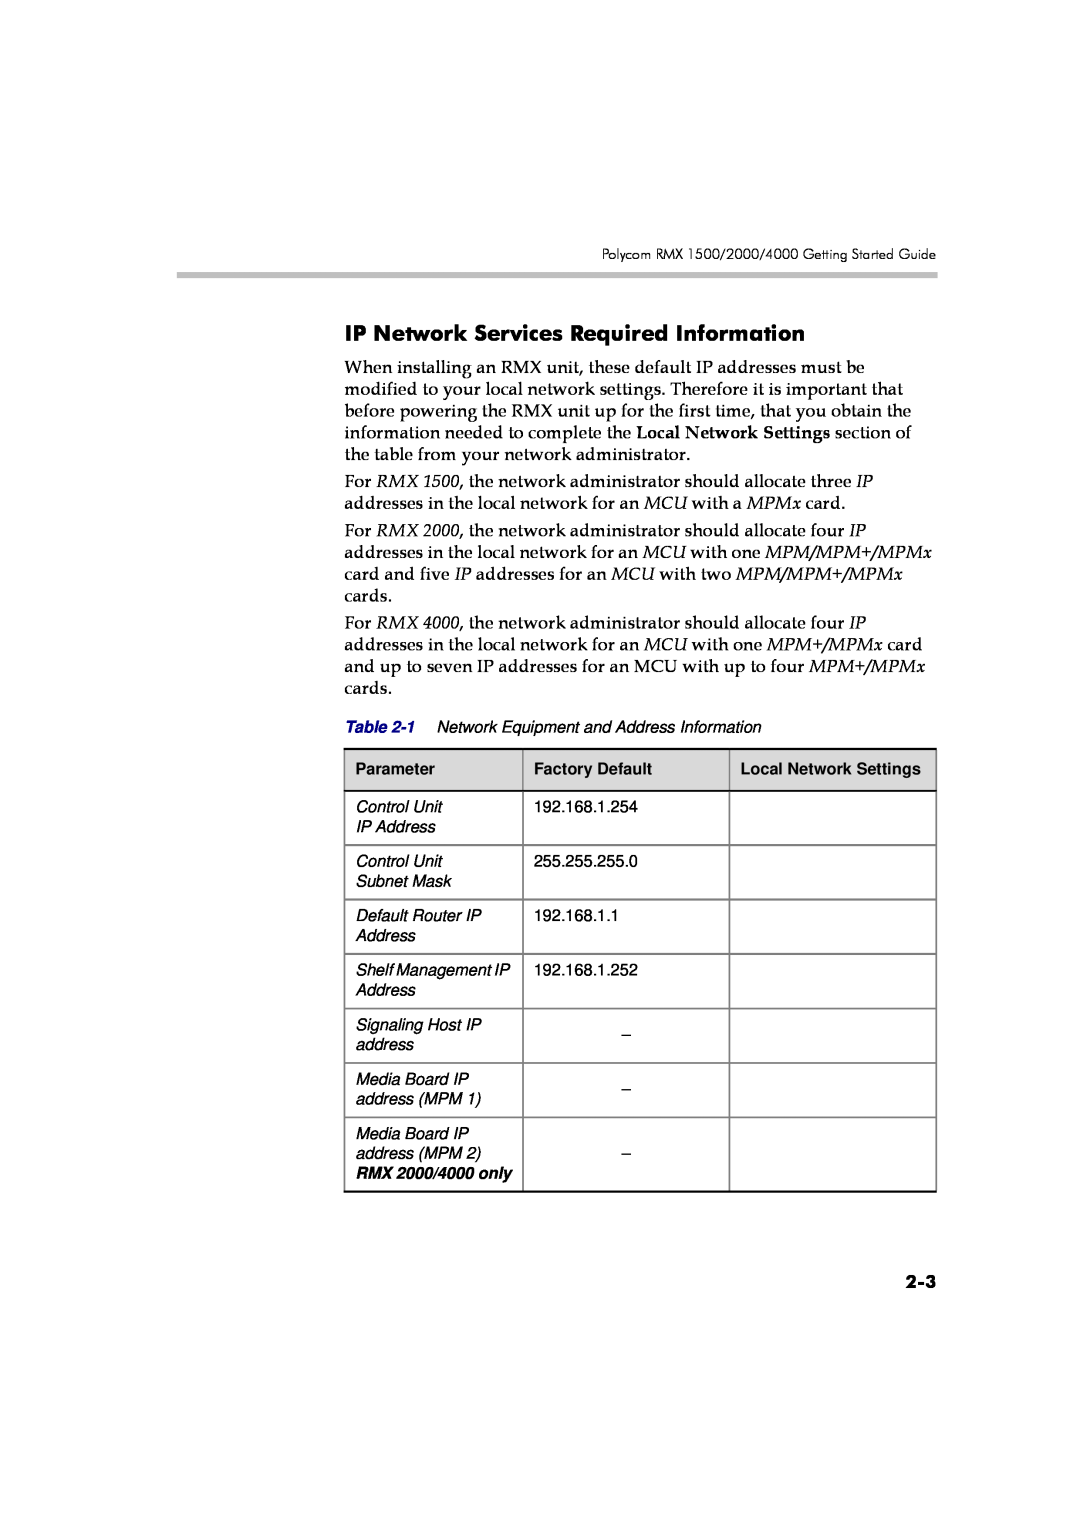 Polycom DOC2560A manual IP Network Services Required Information, Parameter, Factory Default, Local Network Settings 